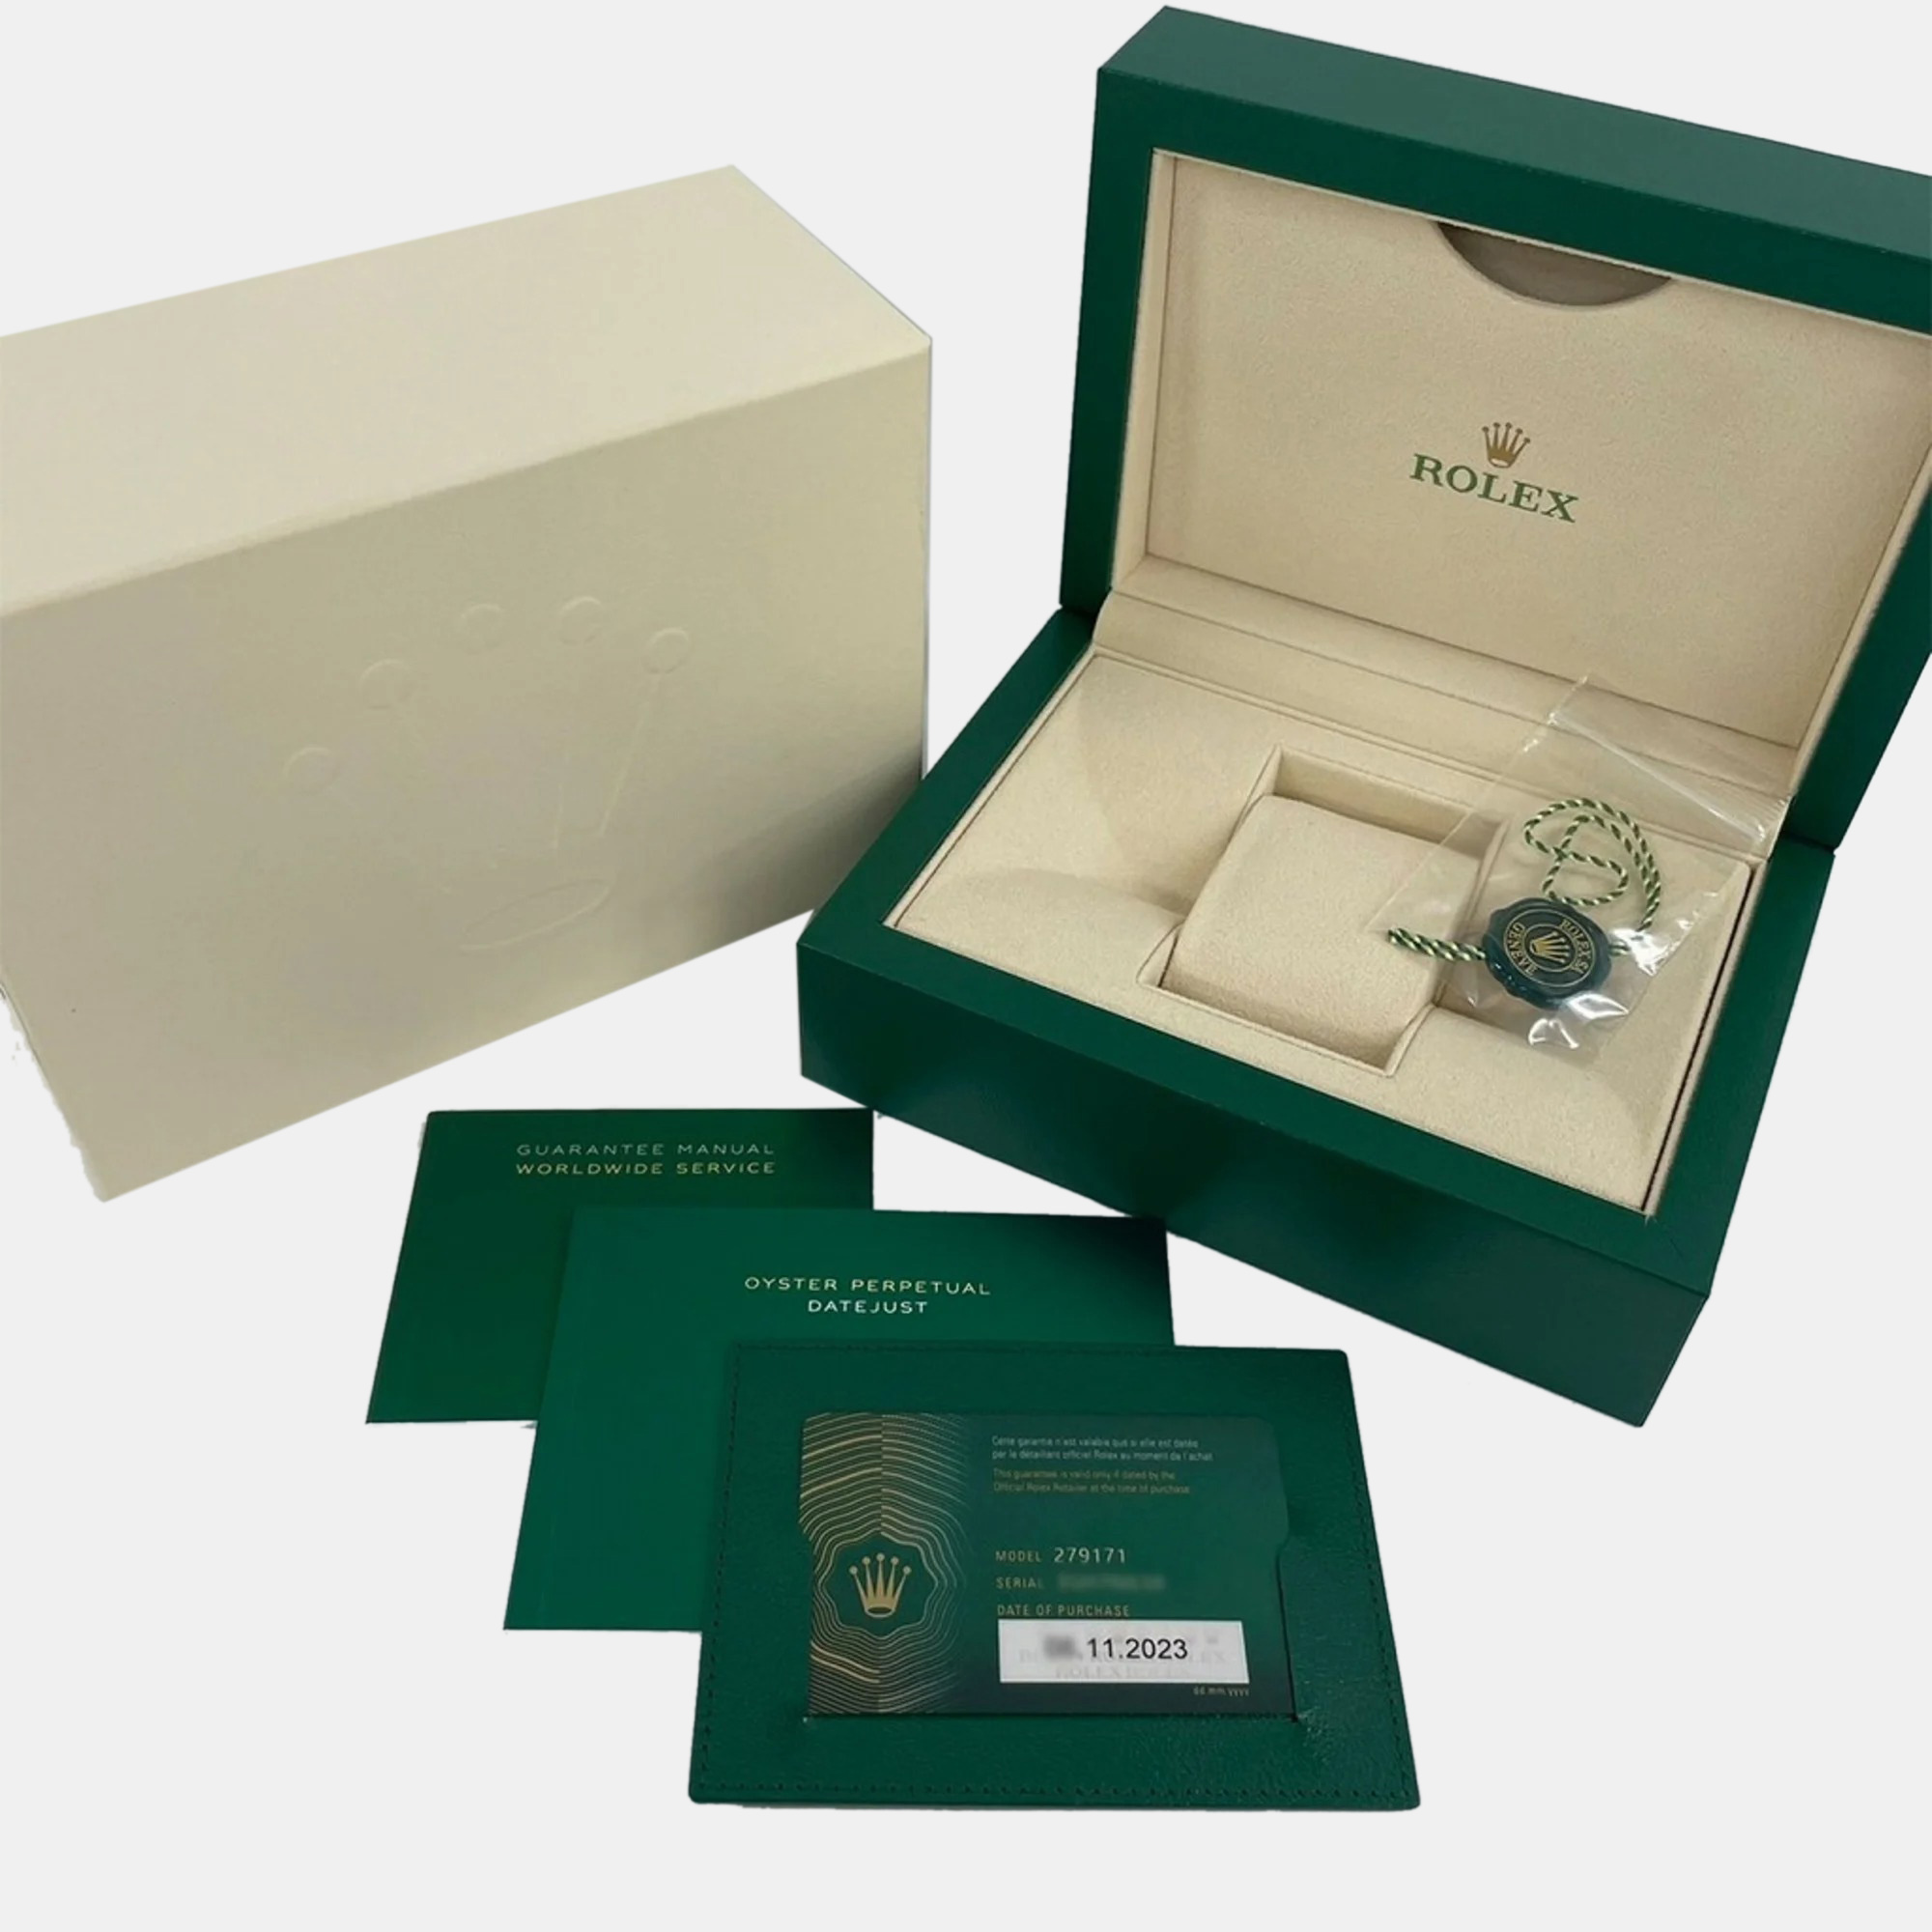 Rolex Green Diamond 18k White Gold And Stainless Steel Datejust 126234 Automatic Men's Wristwatch 36 Mm